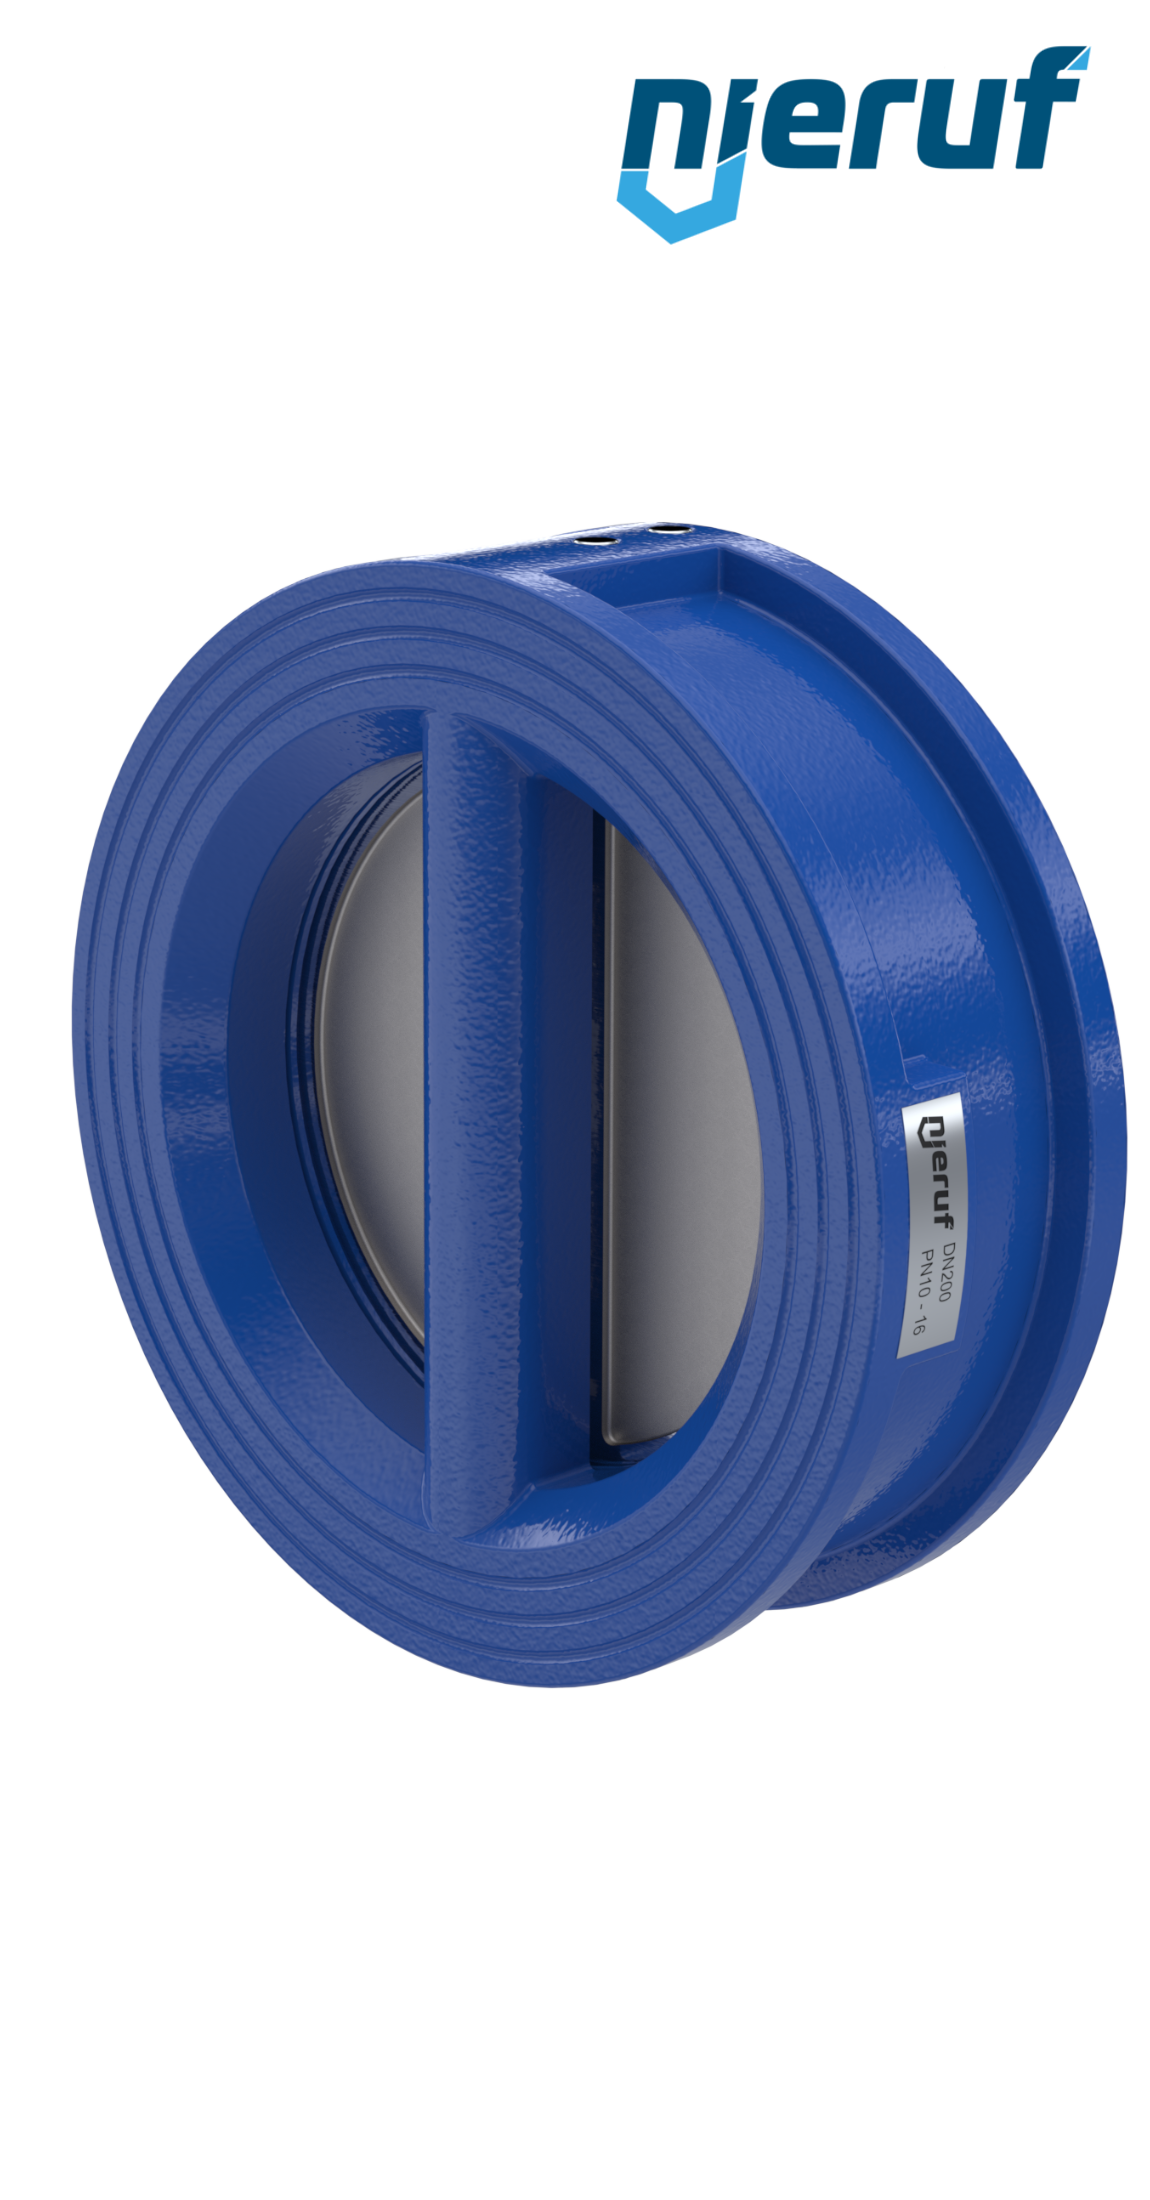 dual plate check valve DN200 DR02 GGG40 epoxyd plated blue 180µm EPDM